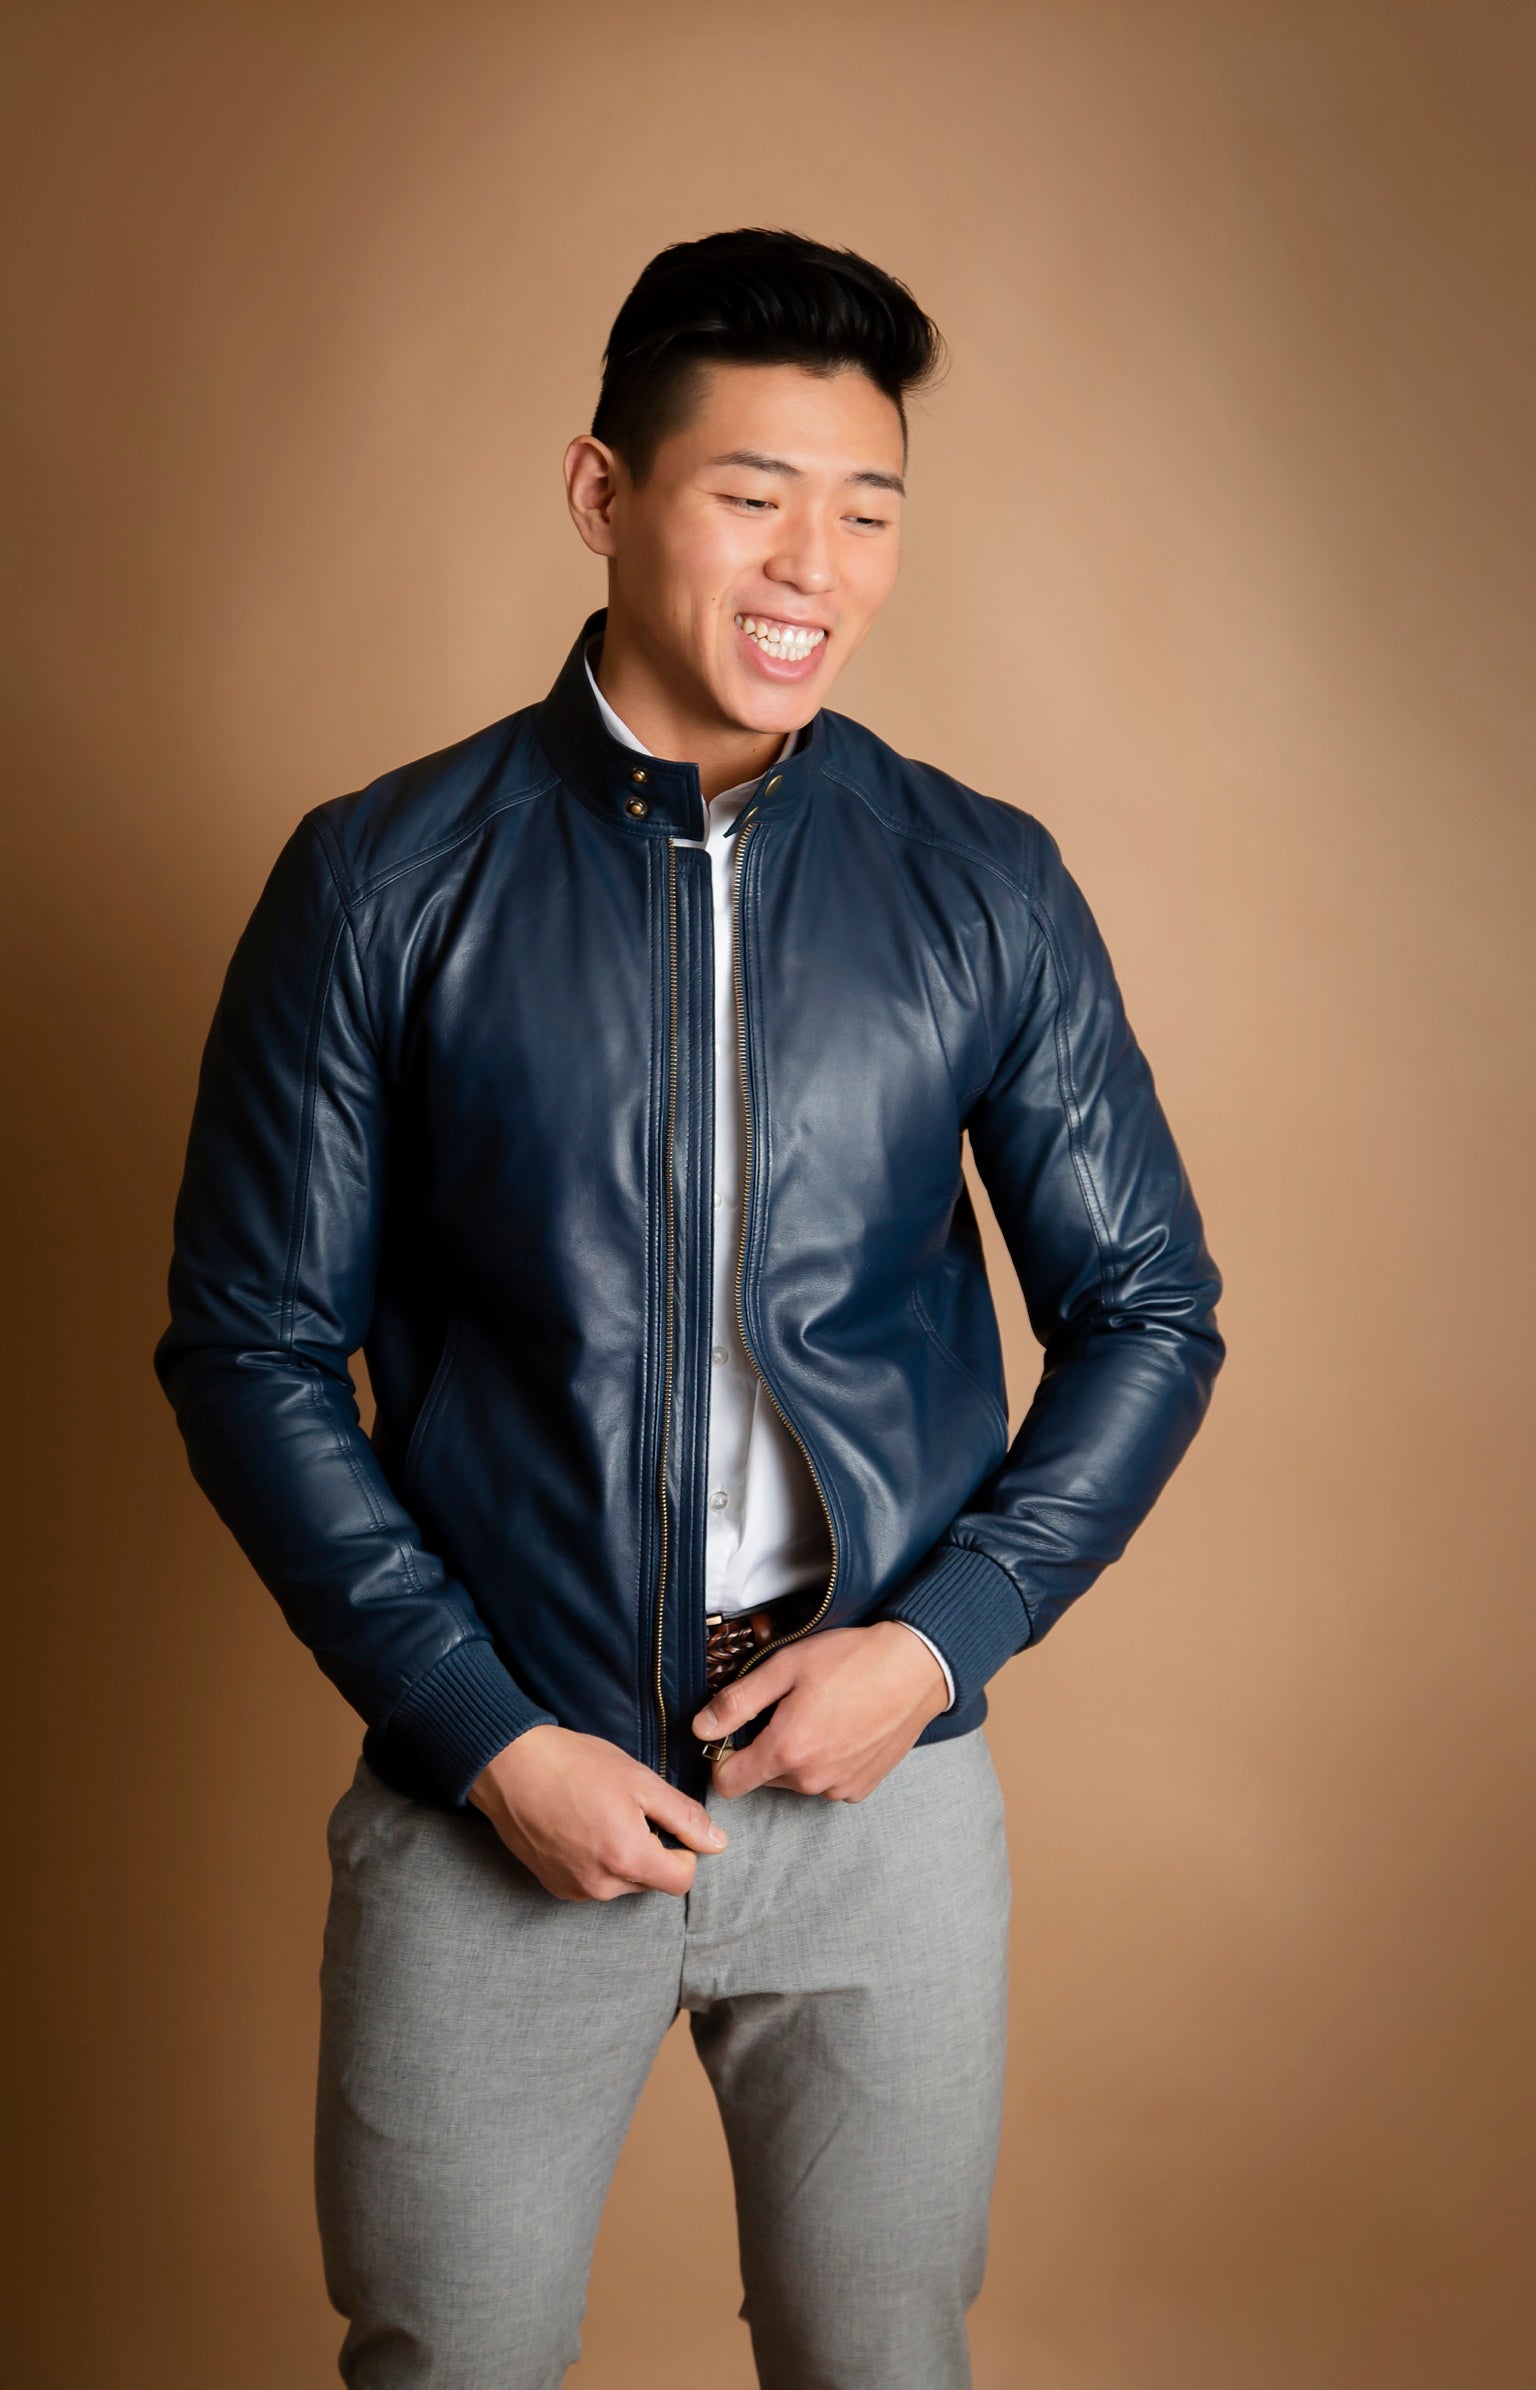 How much does a good leather jacket cost? - Quora